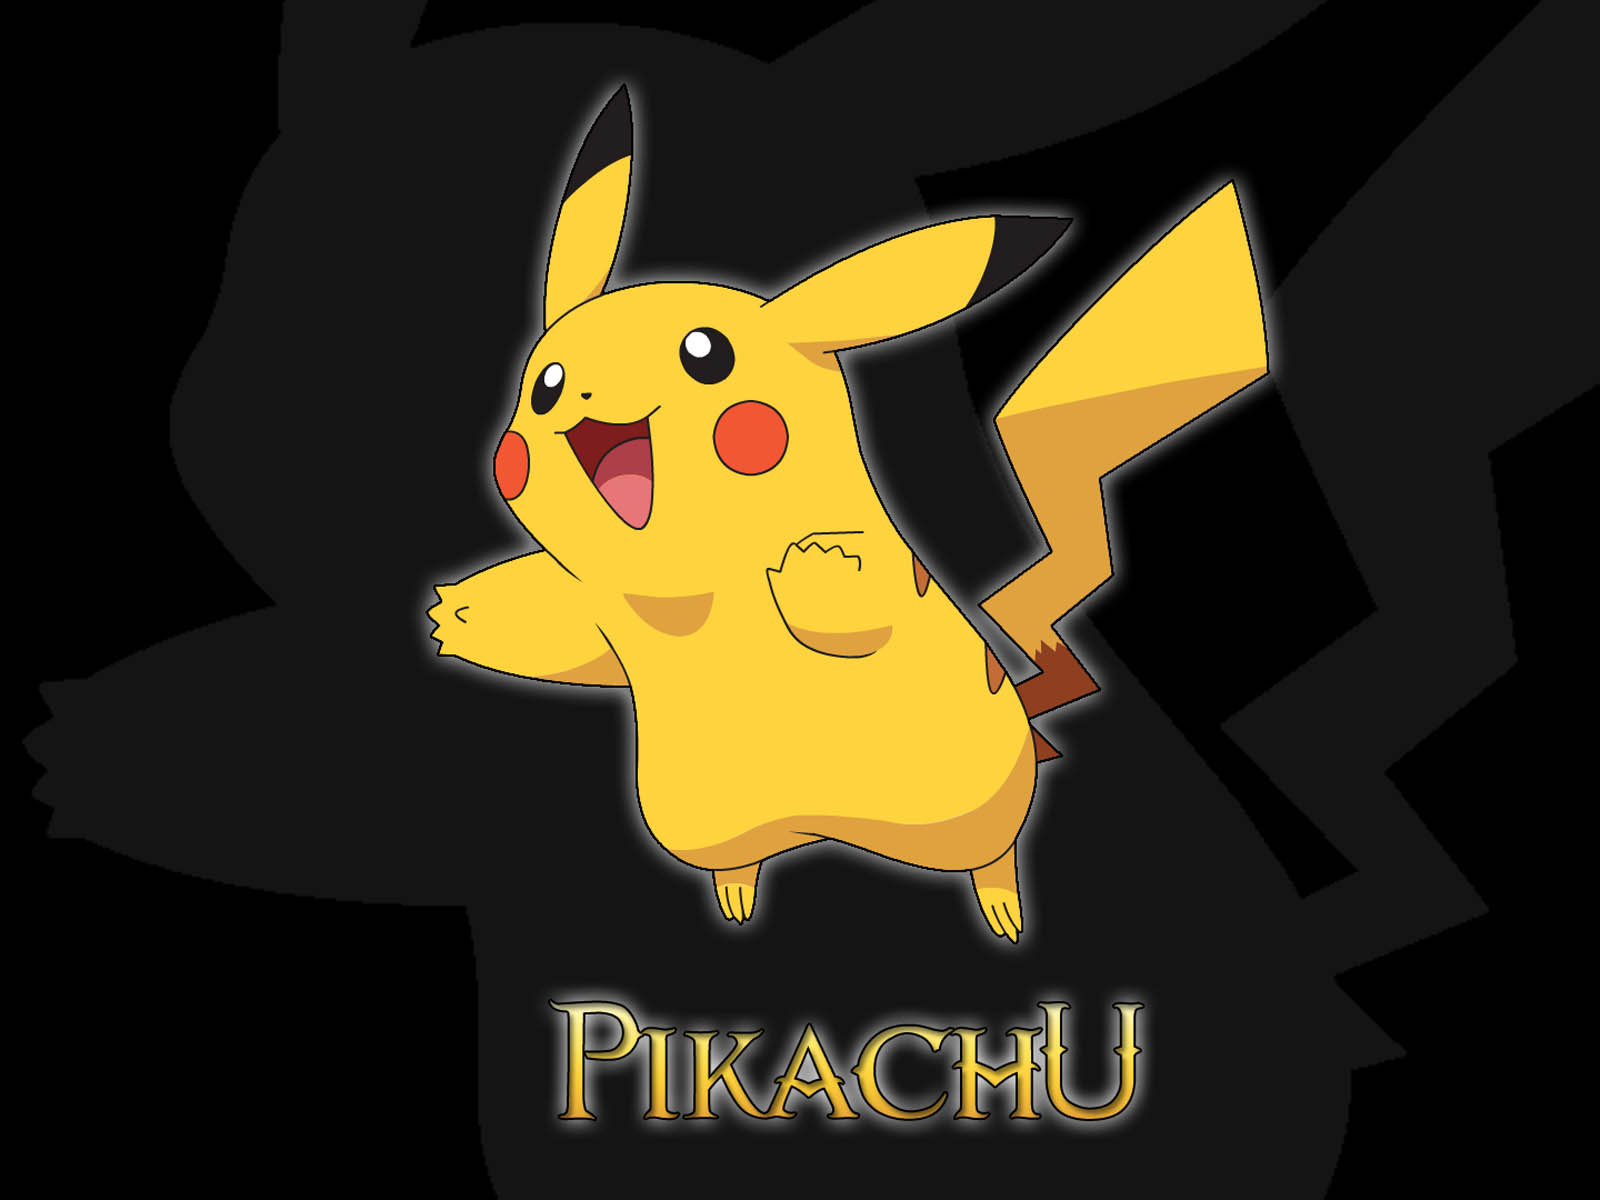 You Are Watching The Pikachu Pokemon Wallpapers, Pikachu - Pikachu Wallpaper In Black , HD Wallpaper & Backgrounds